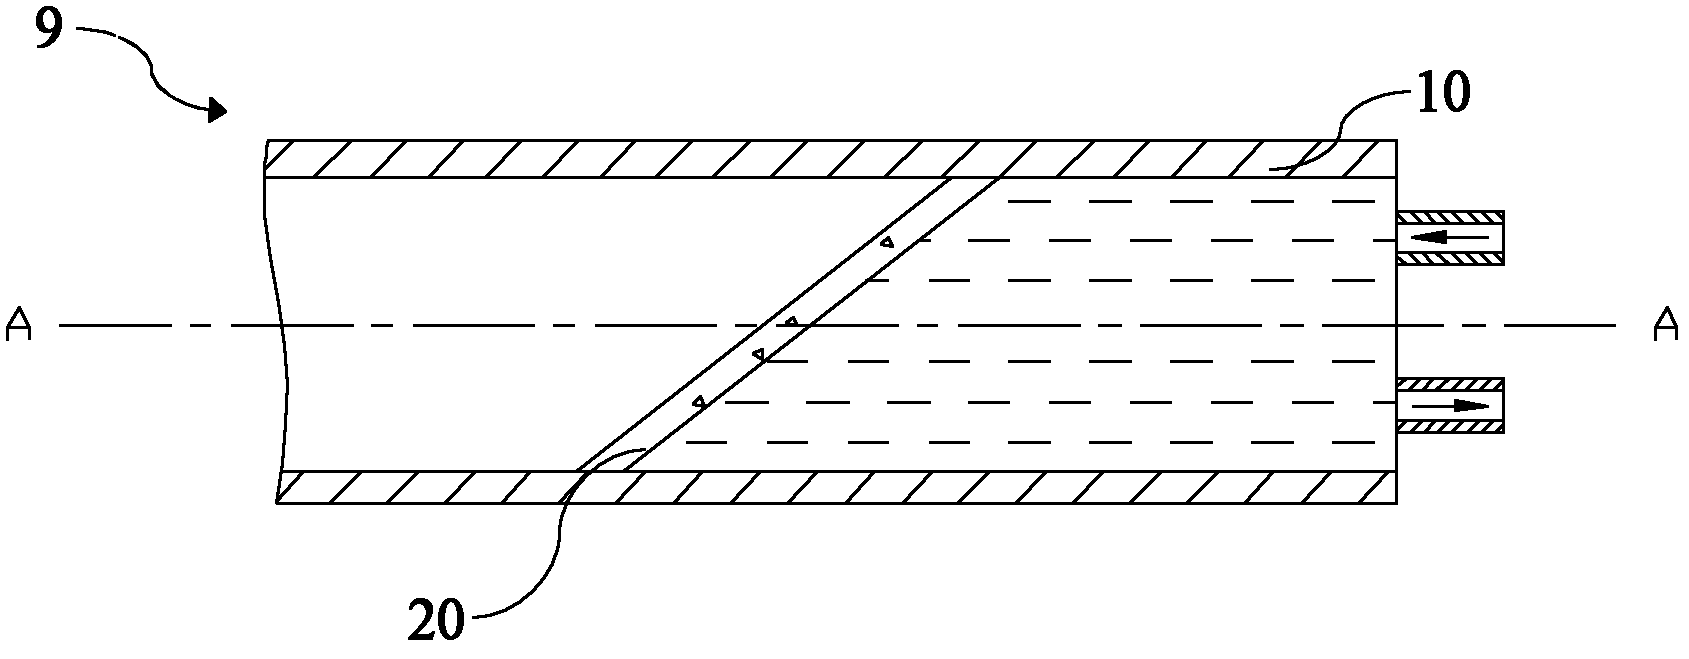 Waveguide device based on metamaterial